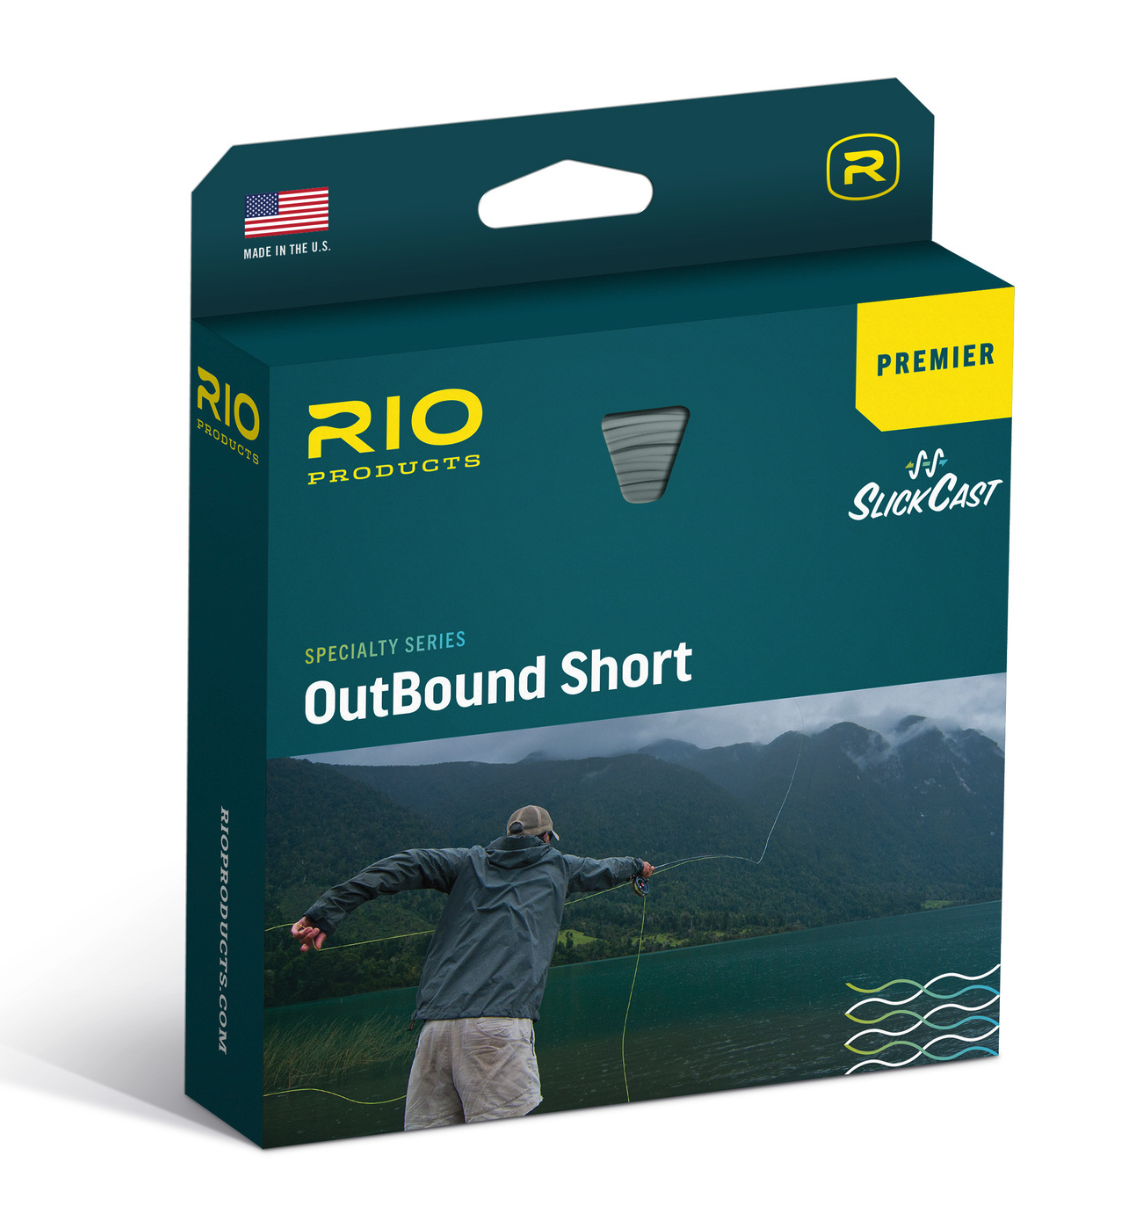 RIO Premier Outbound Short Fly Line is designed to cast large and heavy flies and get huge distances easily.